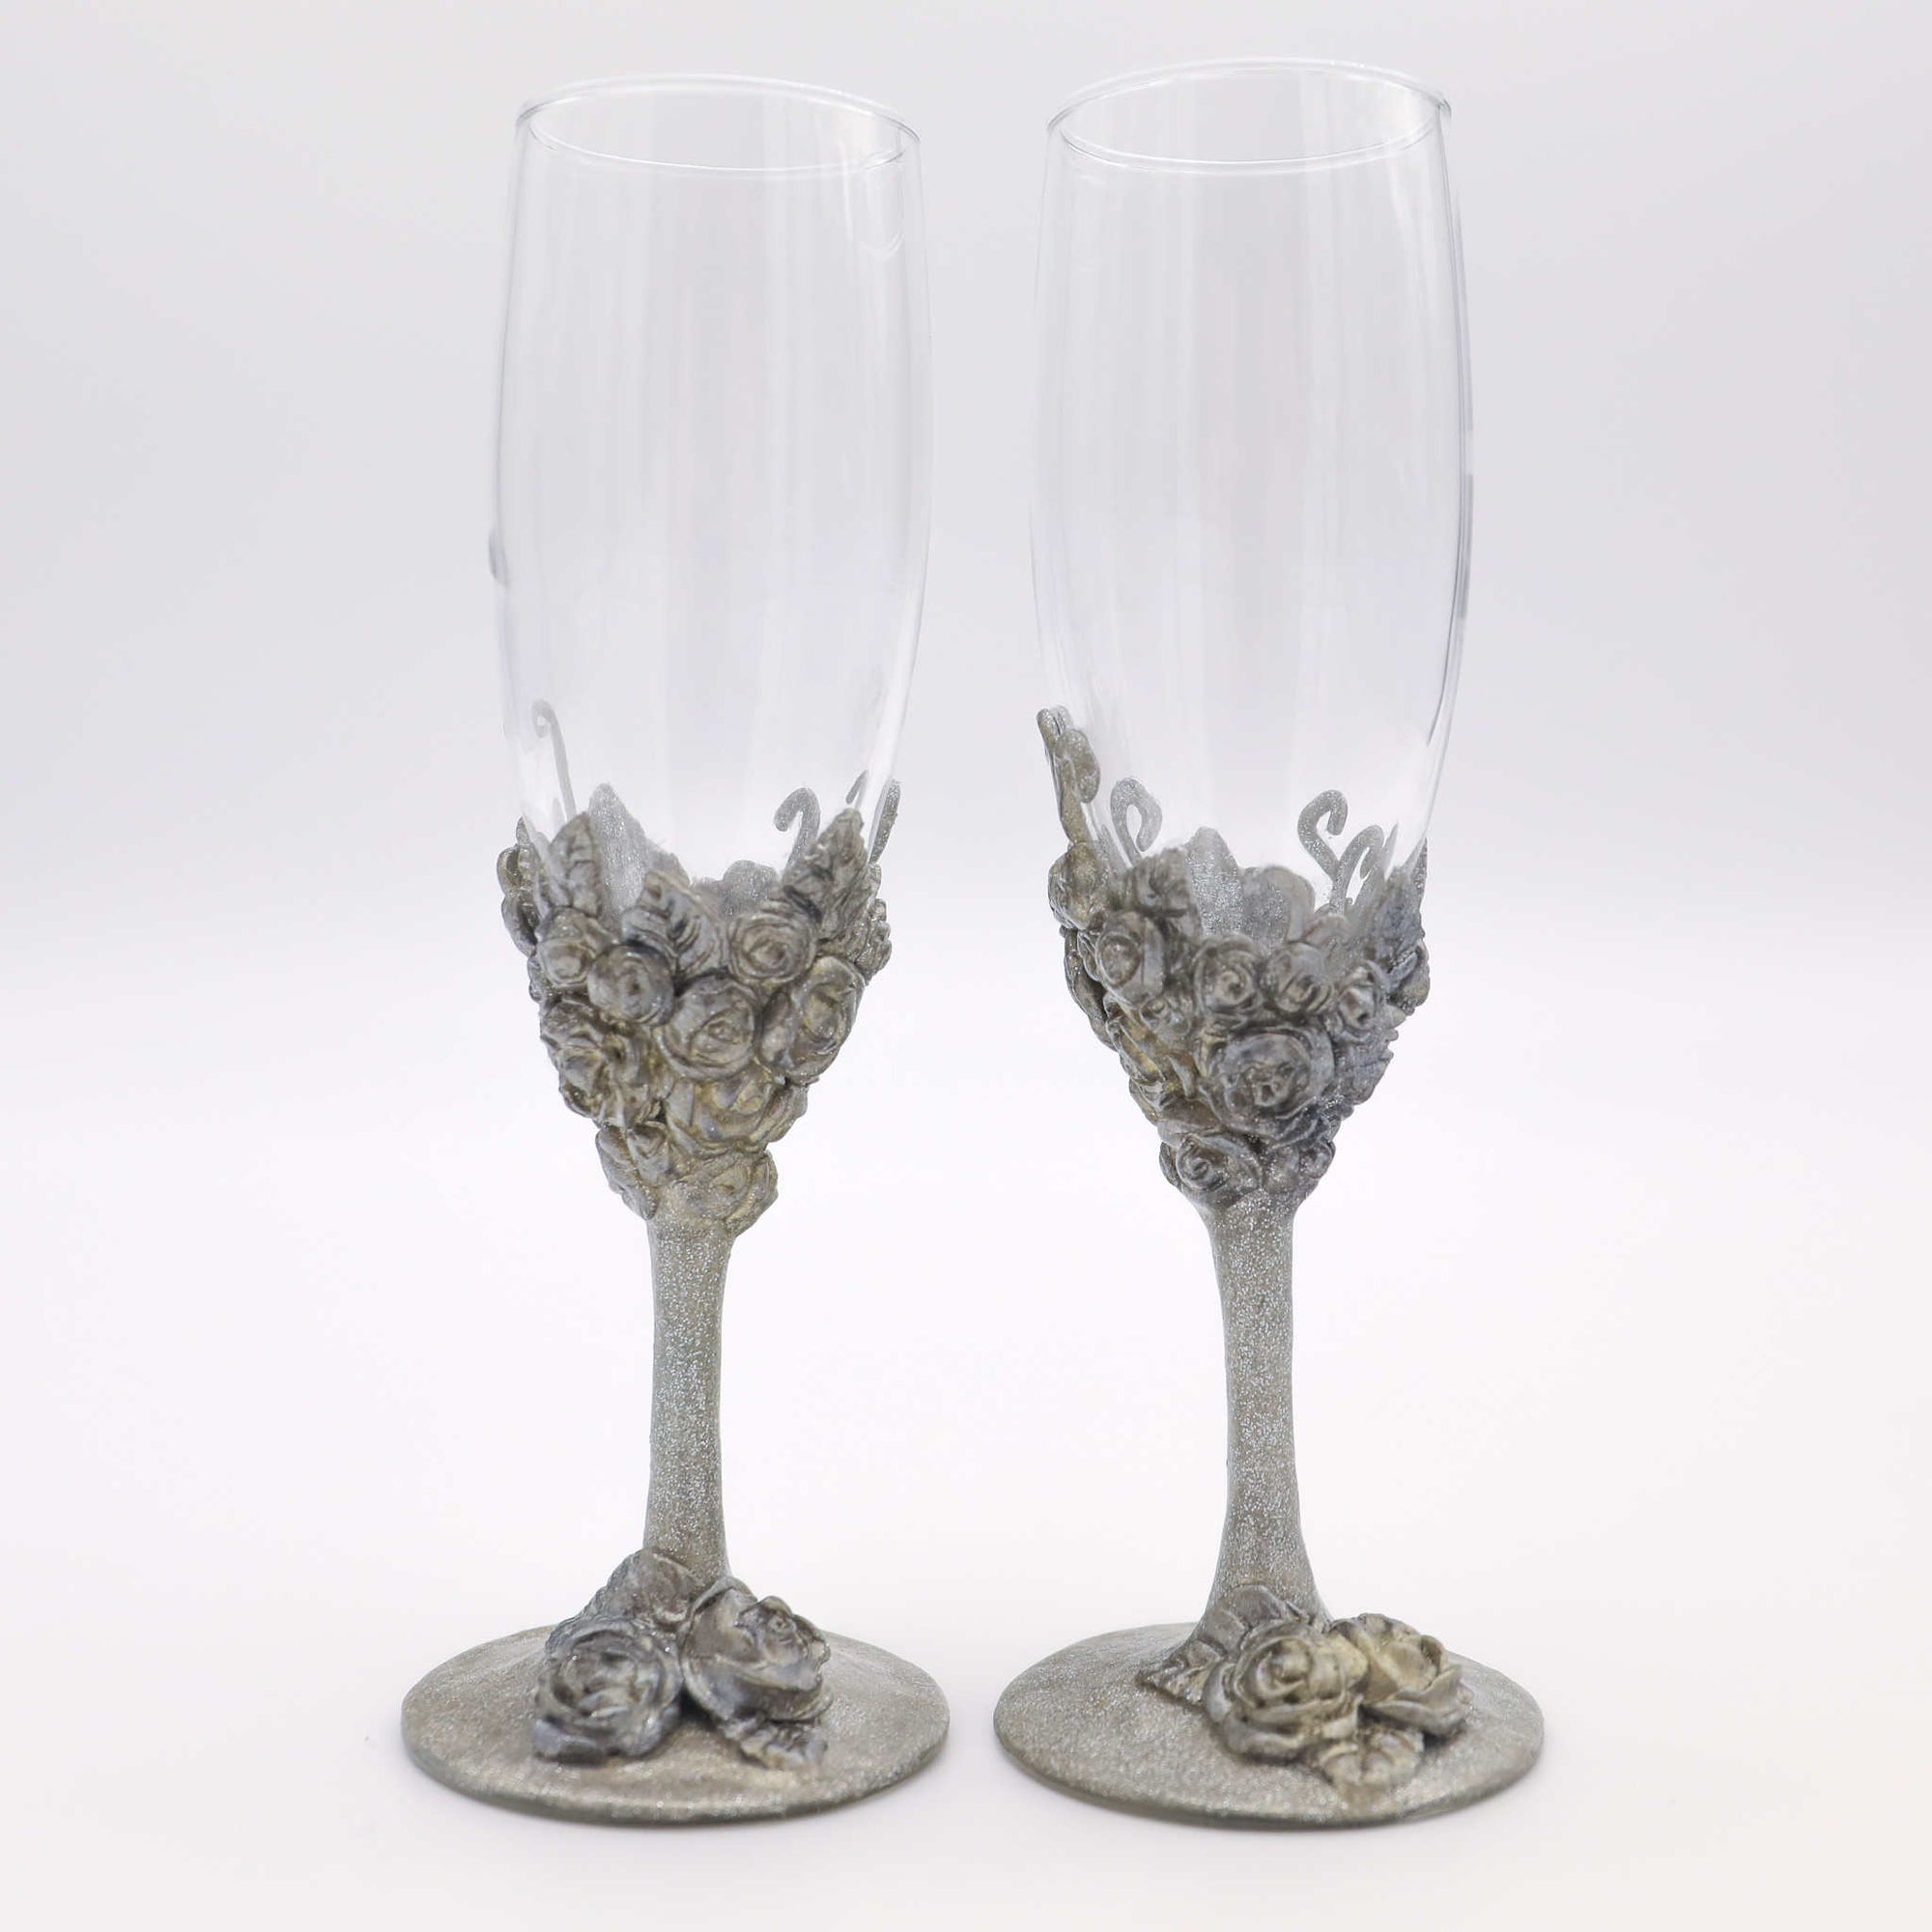 Celebrate your love with our stemware gift set. Each steamware set is the perfect way to add a little sparkle and a special touch of color. Makes a wonderful gift for engagements, showers, weddings and anniversaries. Each wine glass is hand-scuplted with polymer clay base and stem of metallic roses, leaves, and vines.